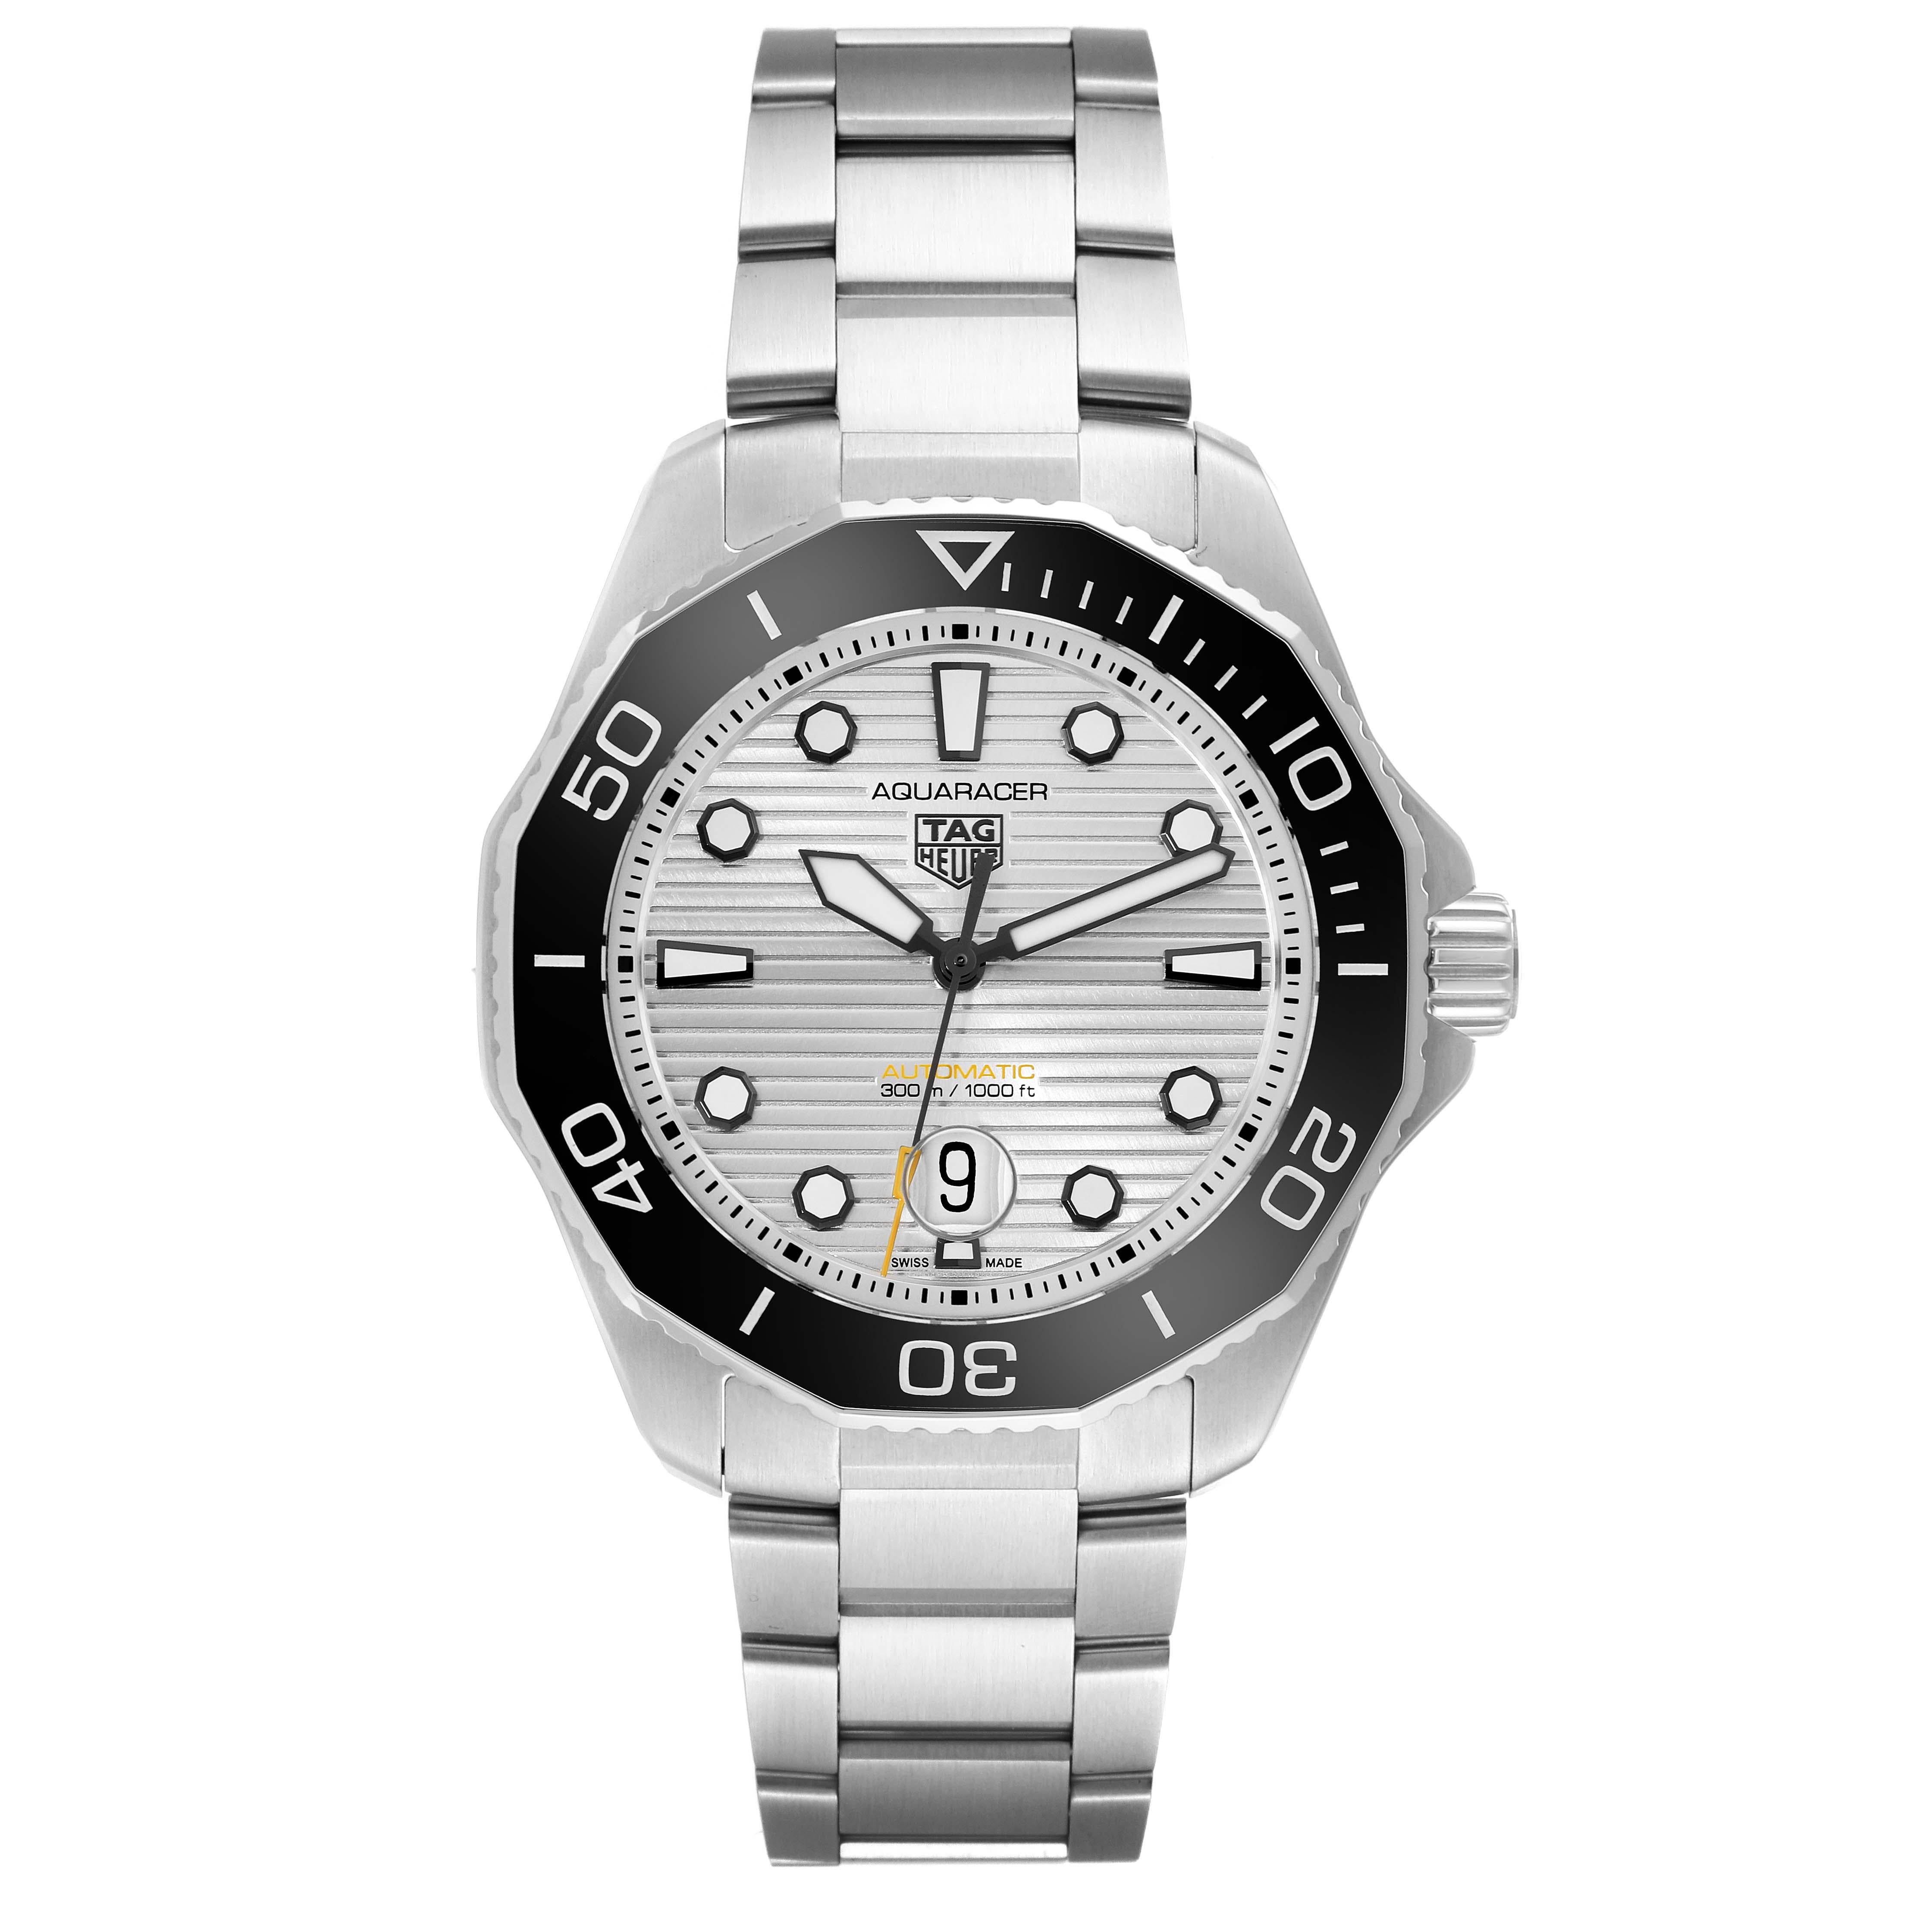 Tag Heuer Aquaracer Professional Silver Dial Steel Mens Watch WBP201C. Automatic self-winding movement. Stainless steel case 43.0 mm in diameter. Stainless steel unidirectional rotating bezel. Scratch resistant sapphire crystal. Silver dial with